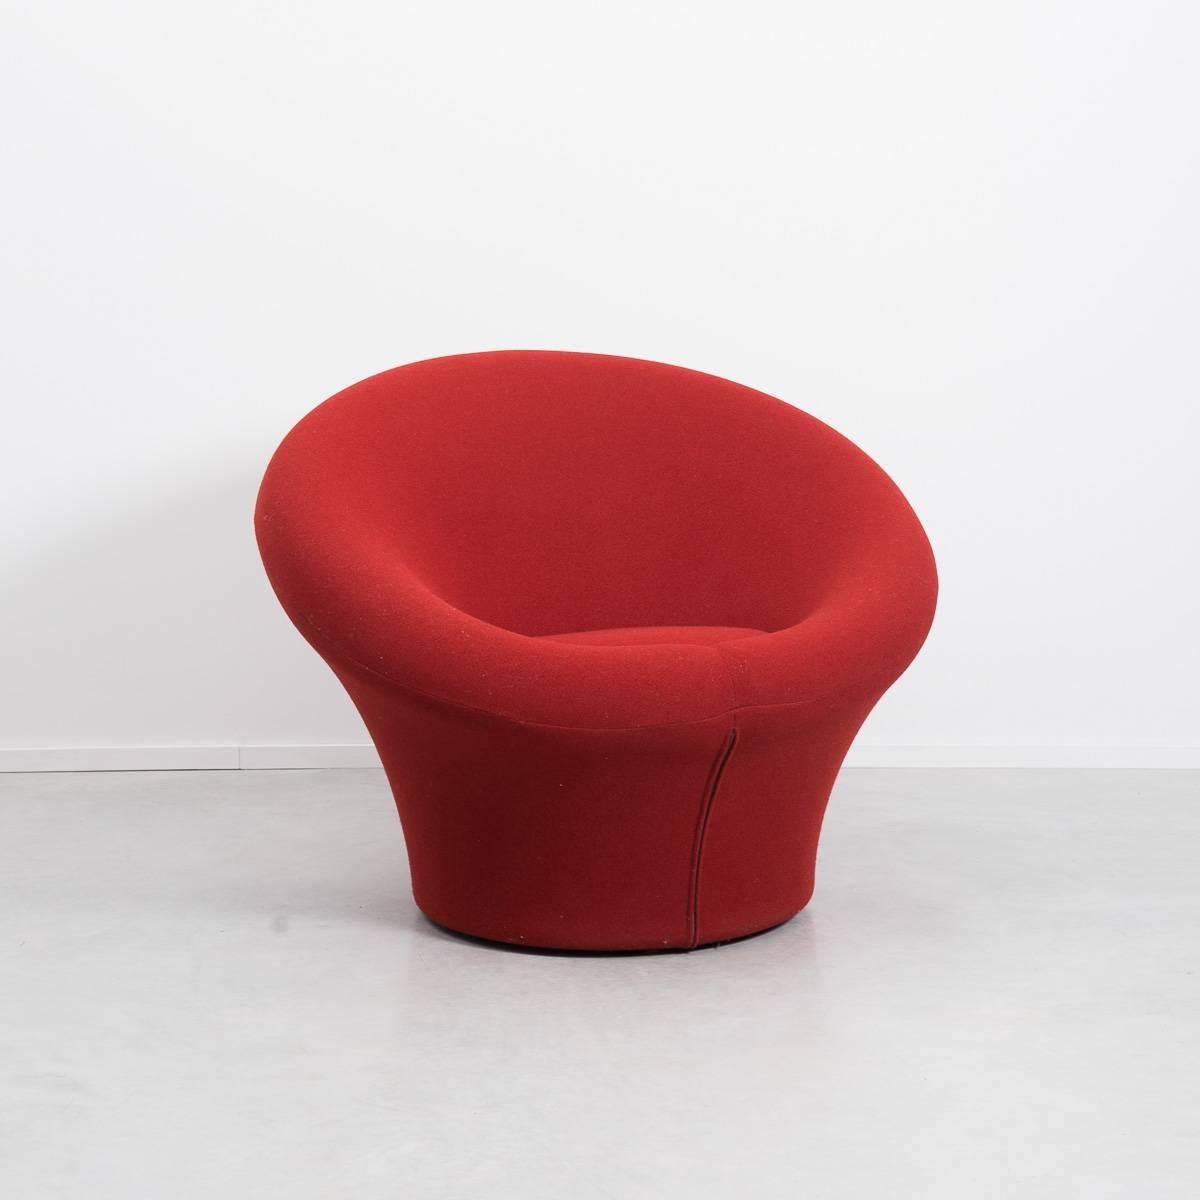 Red Pierre Paulin Mushroom chair designed for Artifort in 1960, Netherlands. 

After a brief spell at Thonet, Pierre Paulin joined Maastricht-based manufacturers Artifort. There he designed the Mushroom (1960), which would propel him to design